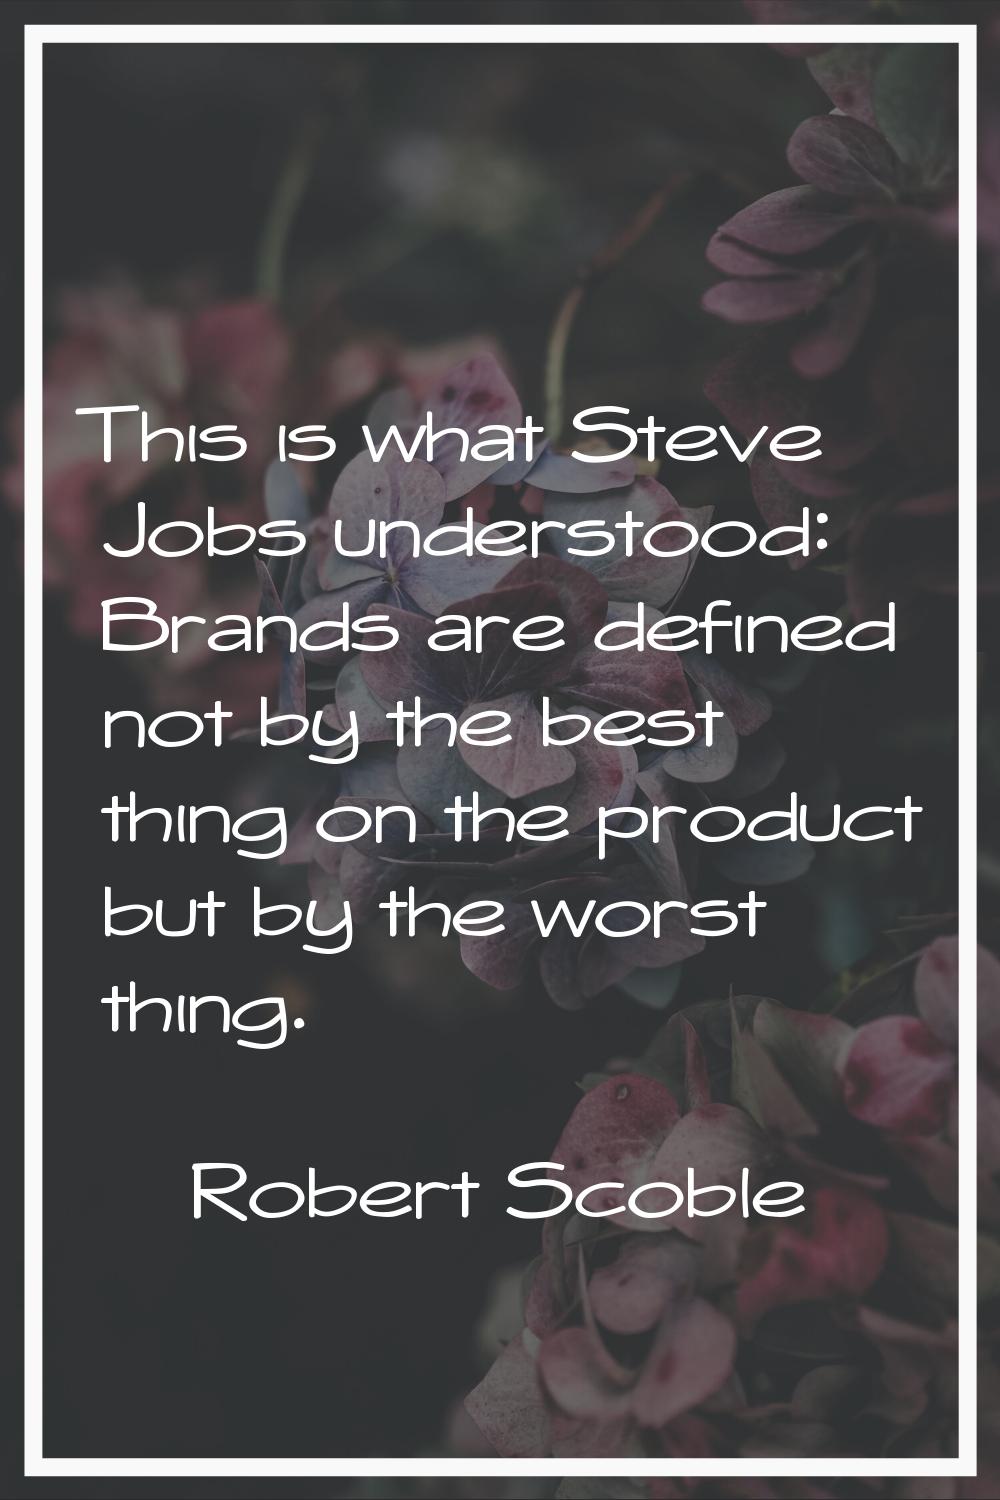 This is what Steve Jobs understood: Brands are defined not by the best thing on the product but by 